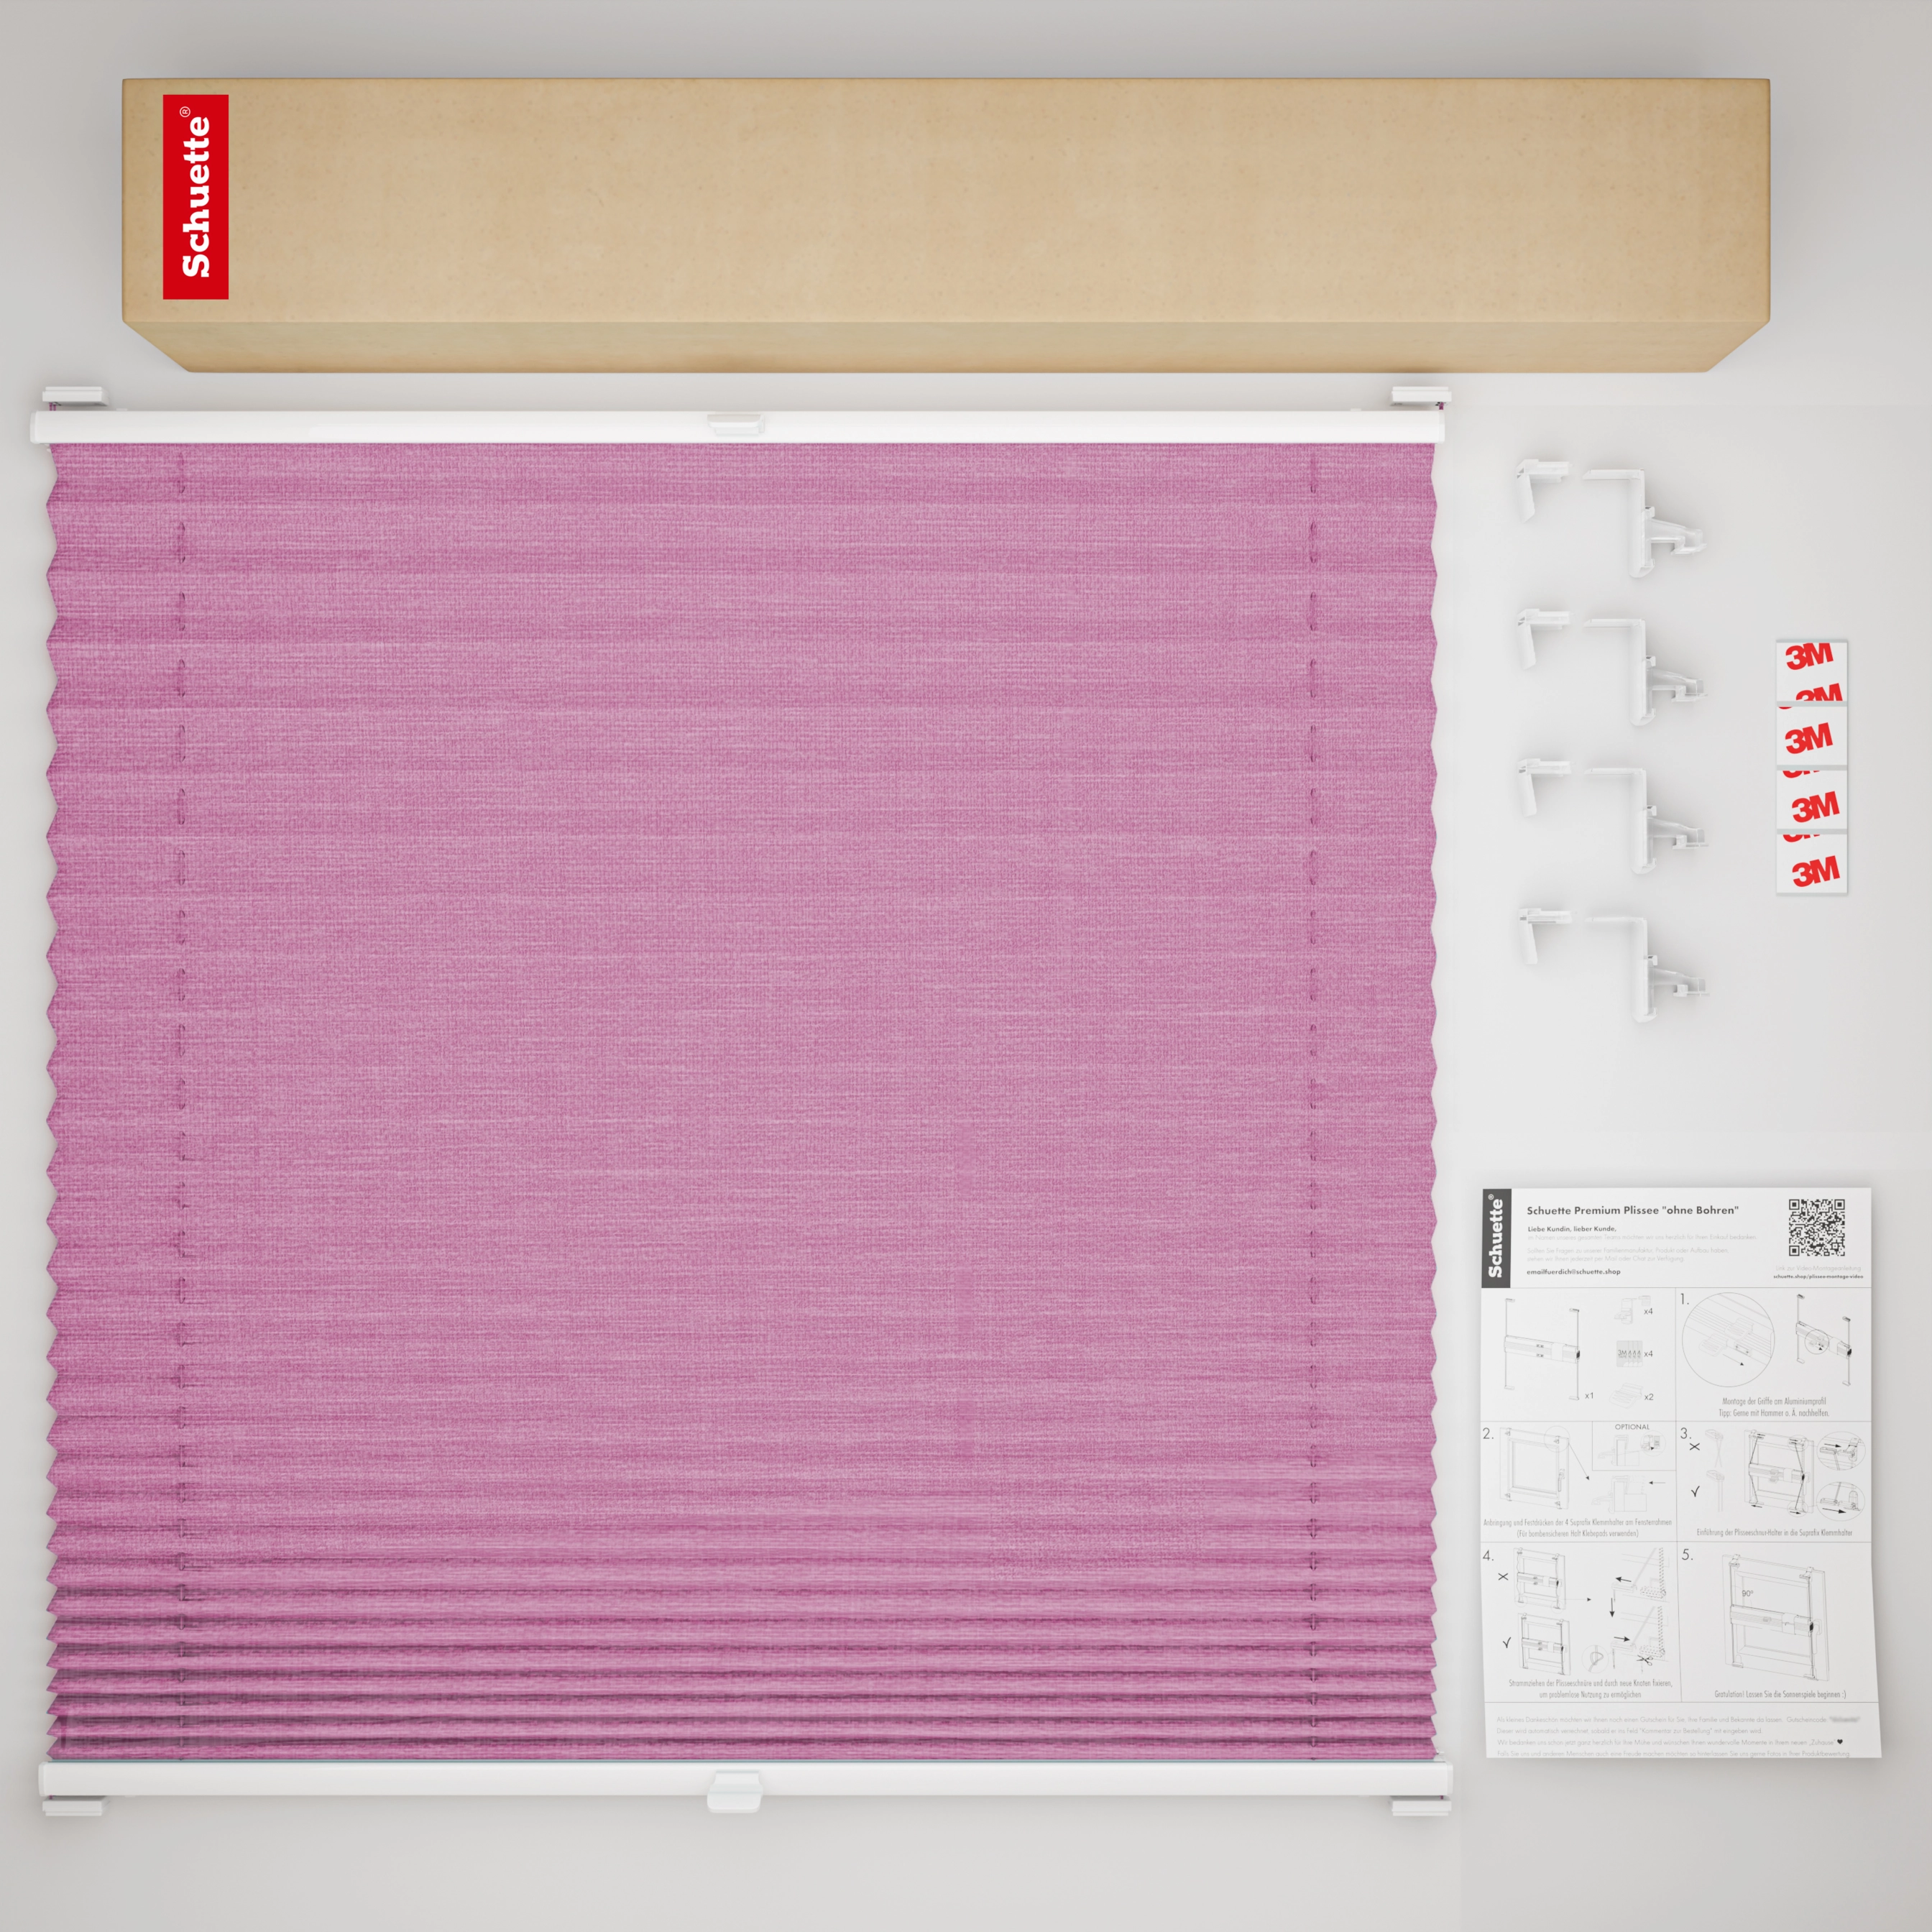 Schuette® Pleated Blind Made to Measure without Drilling • Suprafix Clamp holder “Incognito" Standard” • Melange Collection: Magic Pink (Pink) • Profile Colour: White